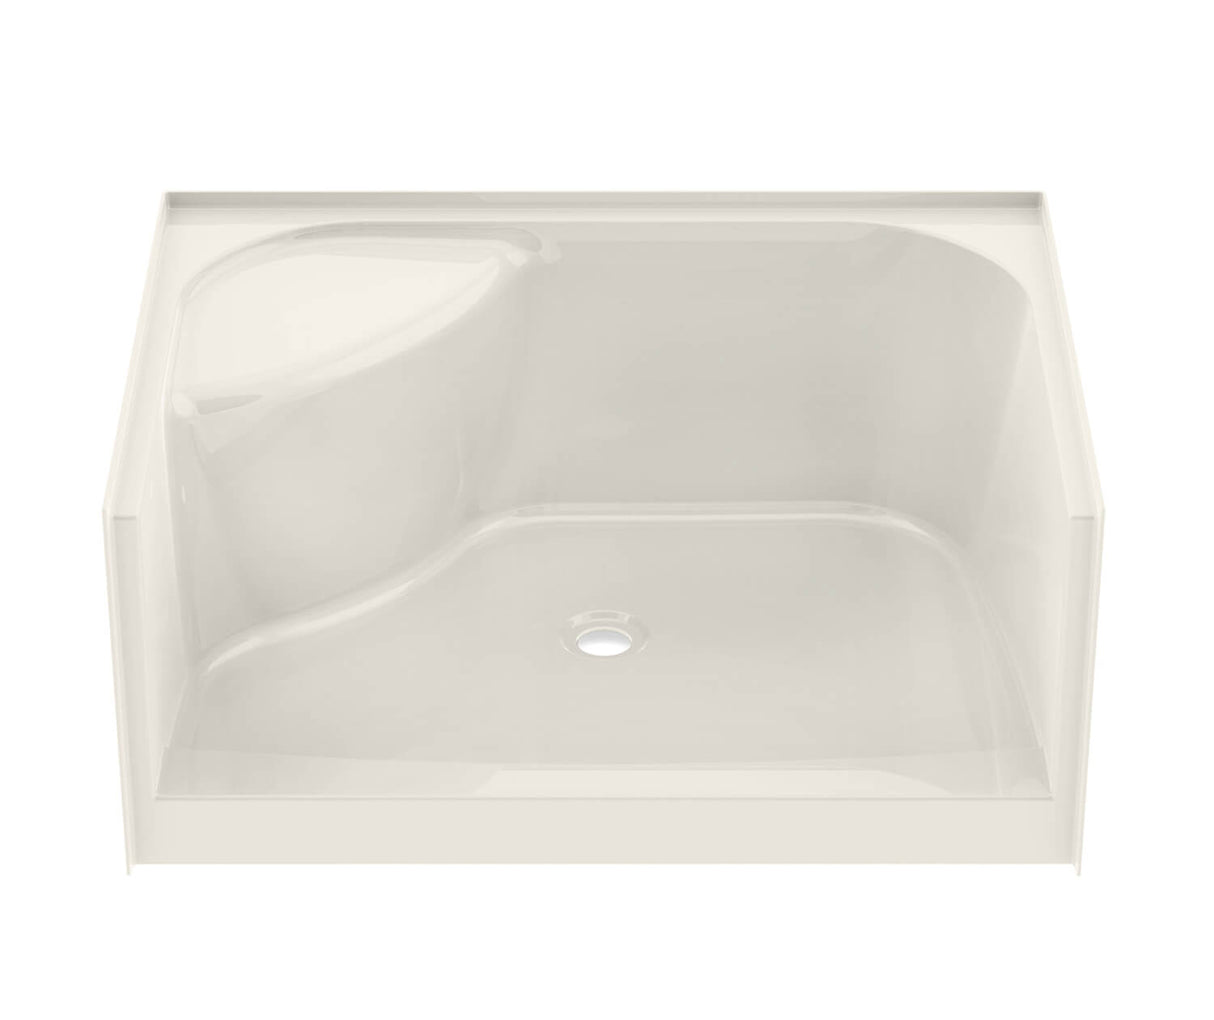 Aker SPS 3448 AFR AcrylX Alcove Center Drain Shower Base in Biscuit